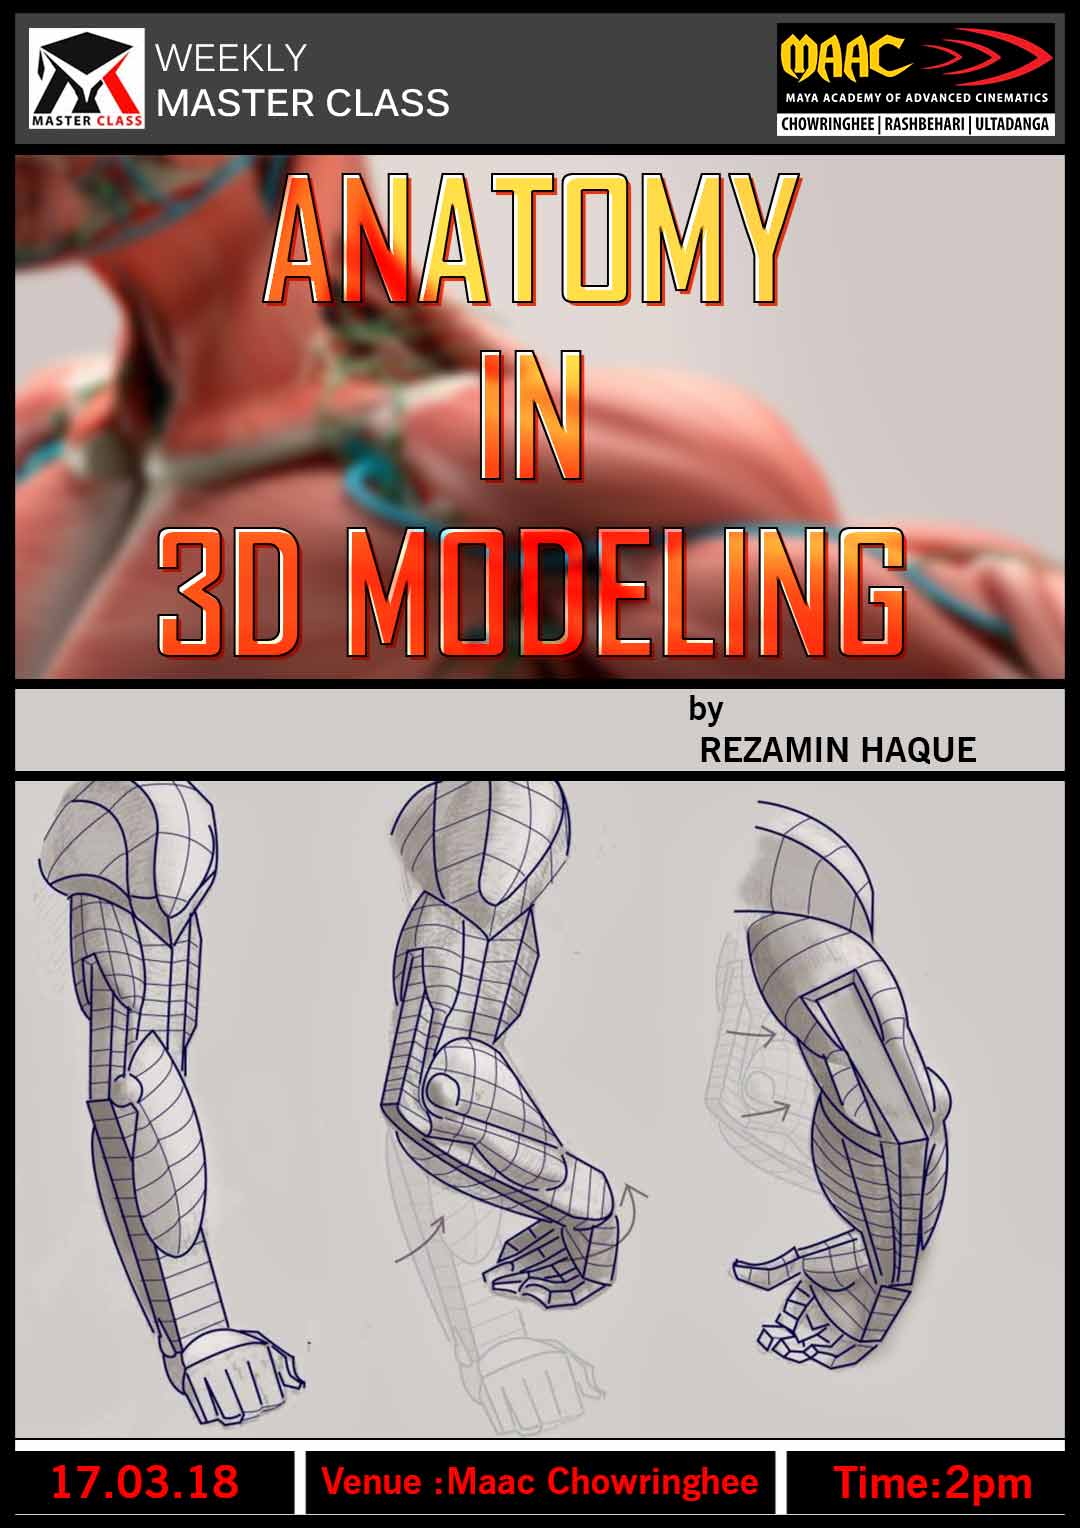 Weekly Master Class on Anatomy In 3D Modeling